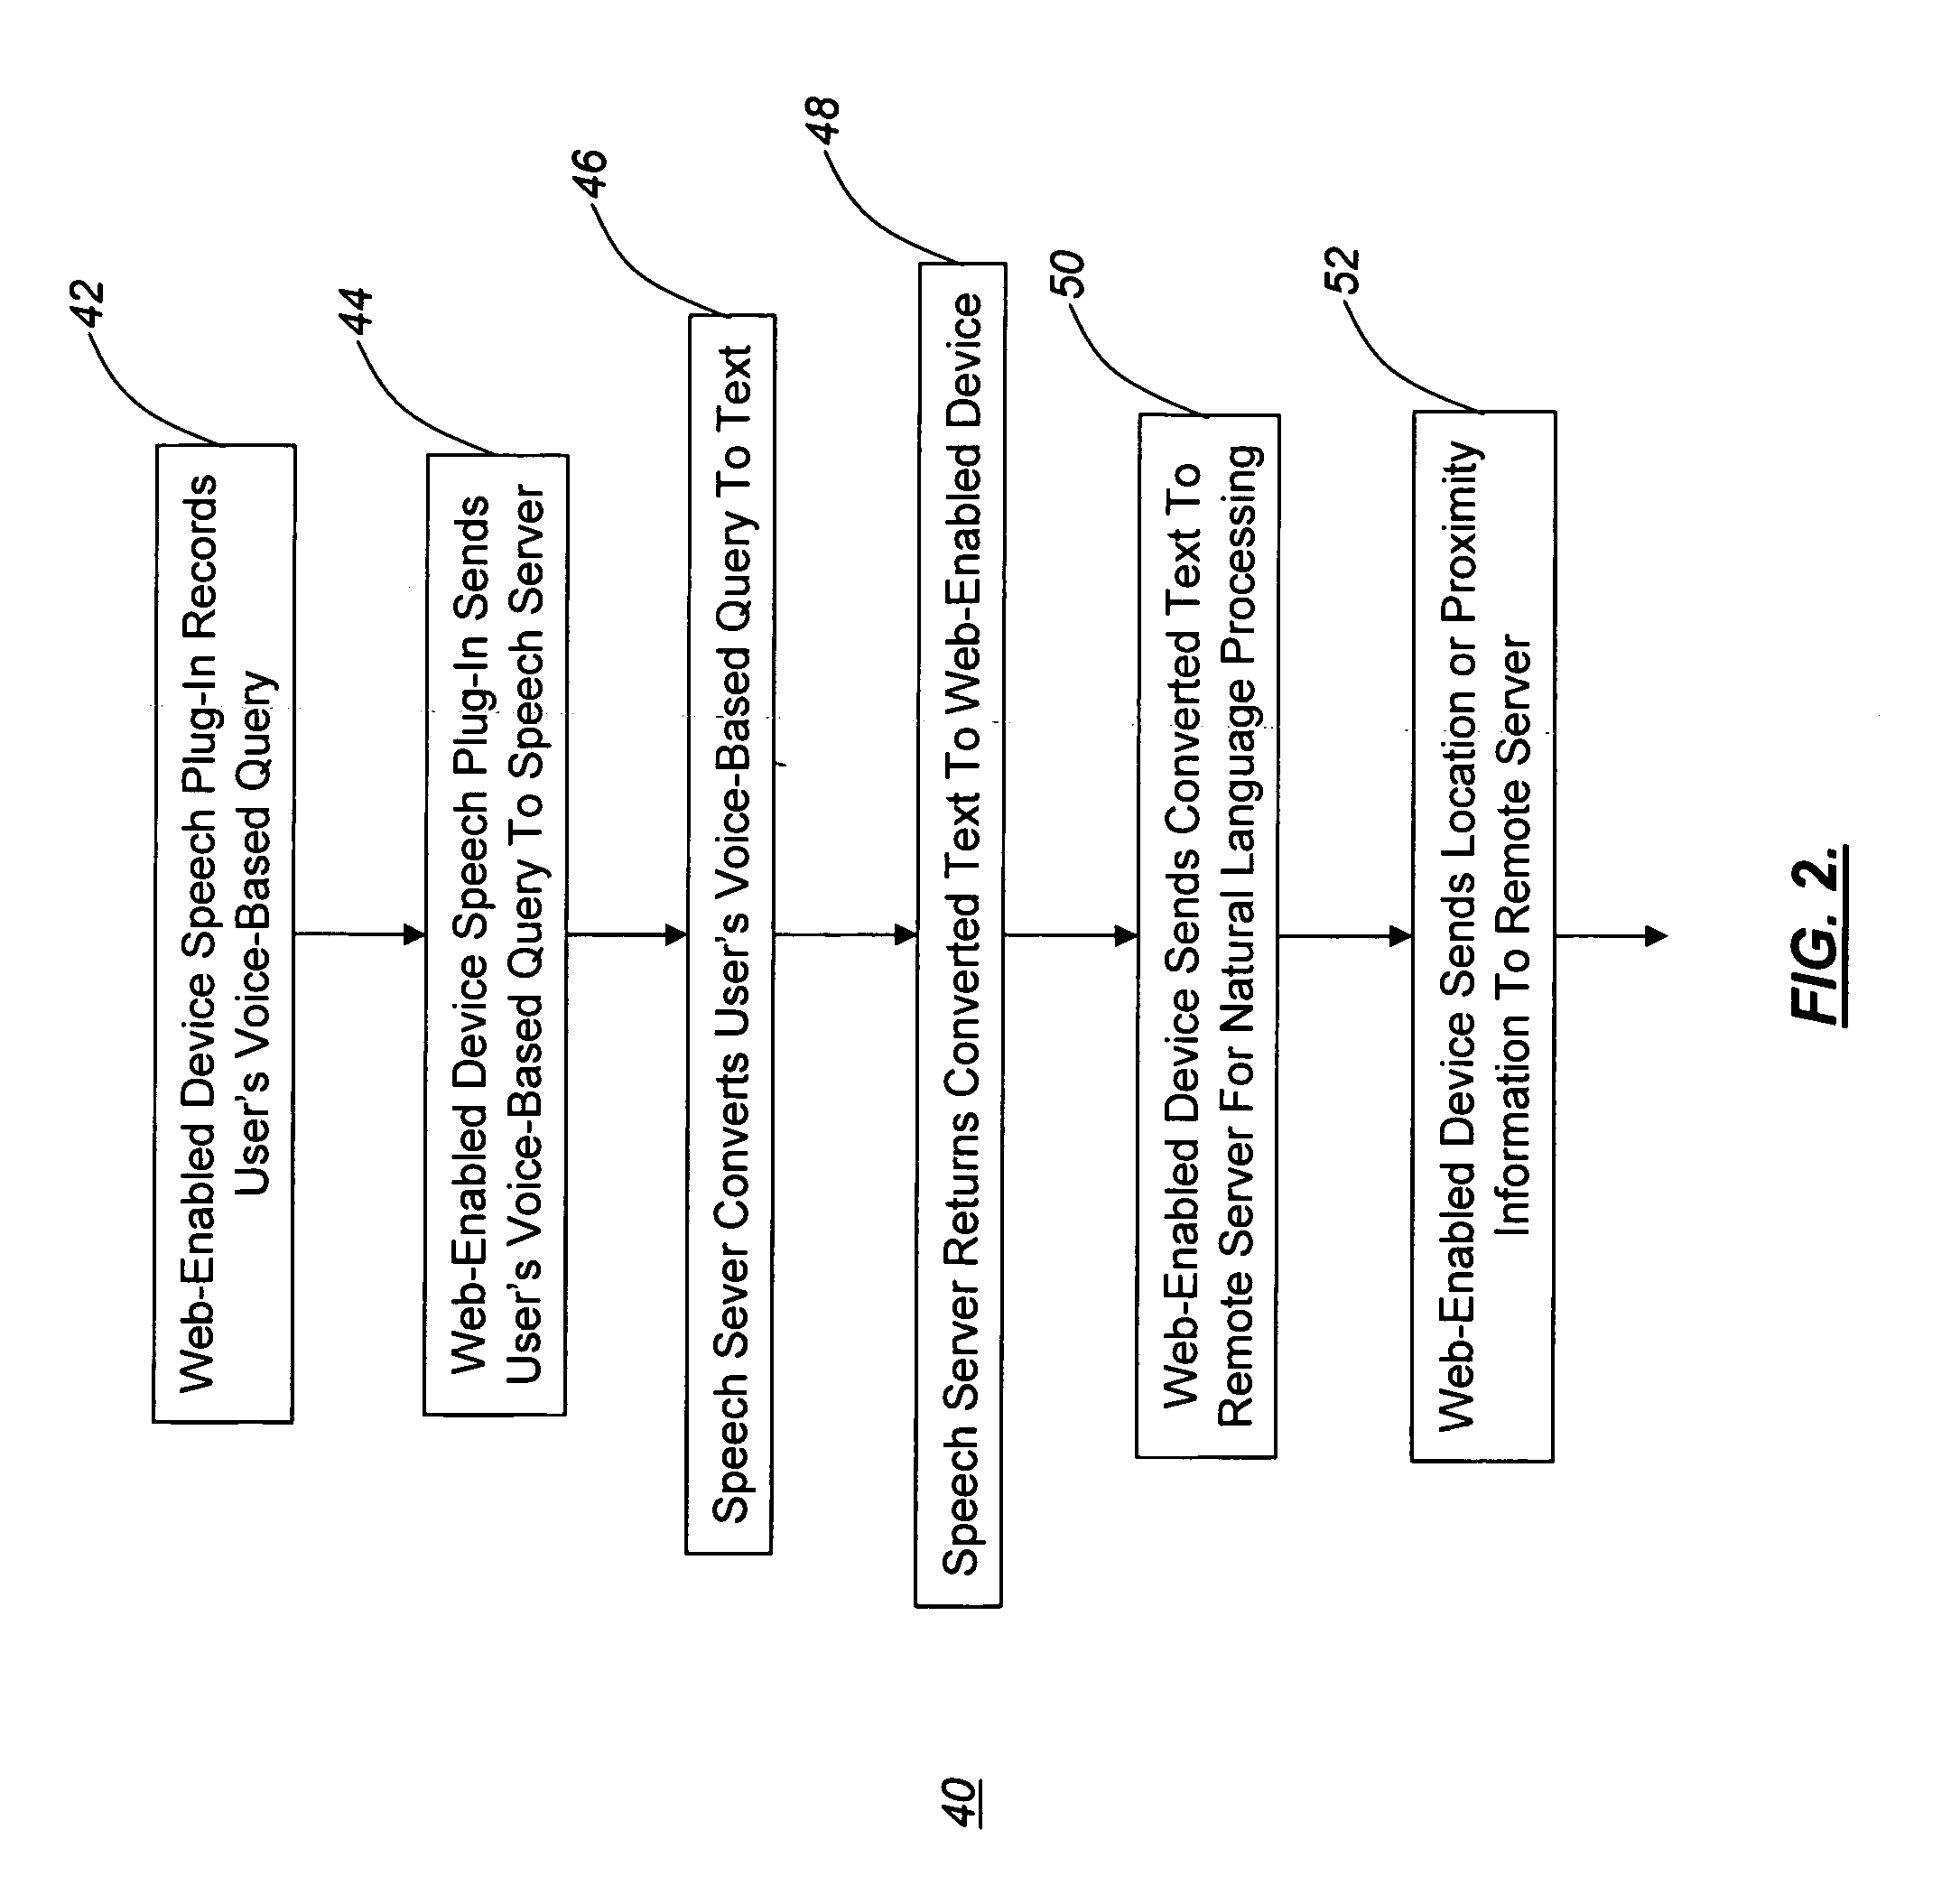 Multimodal natural language query system and architecture for processing voice and proximity-based queries